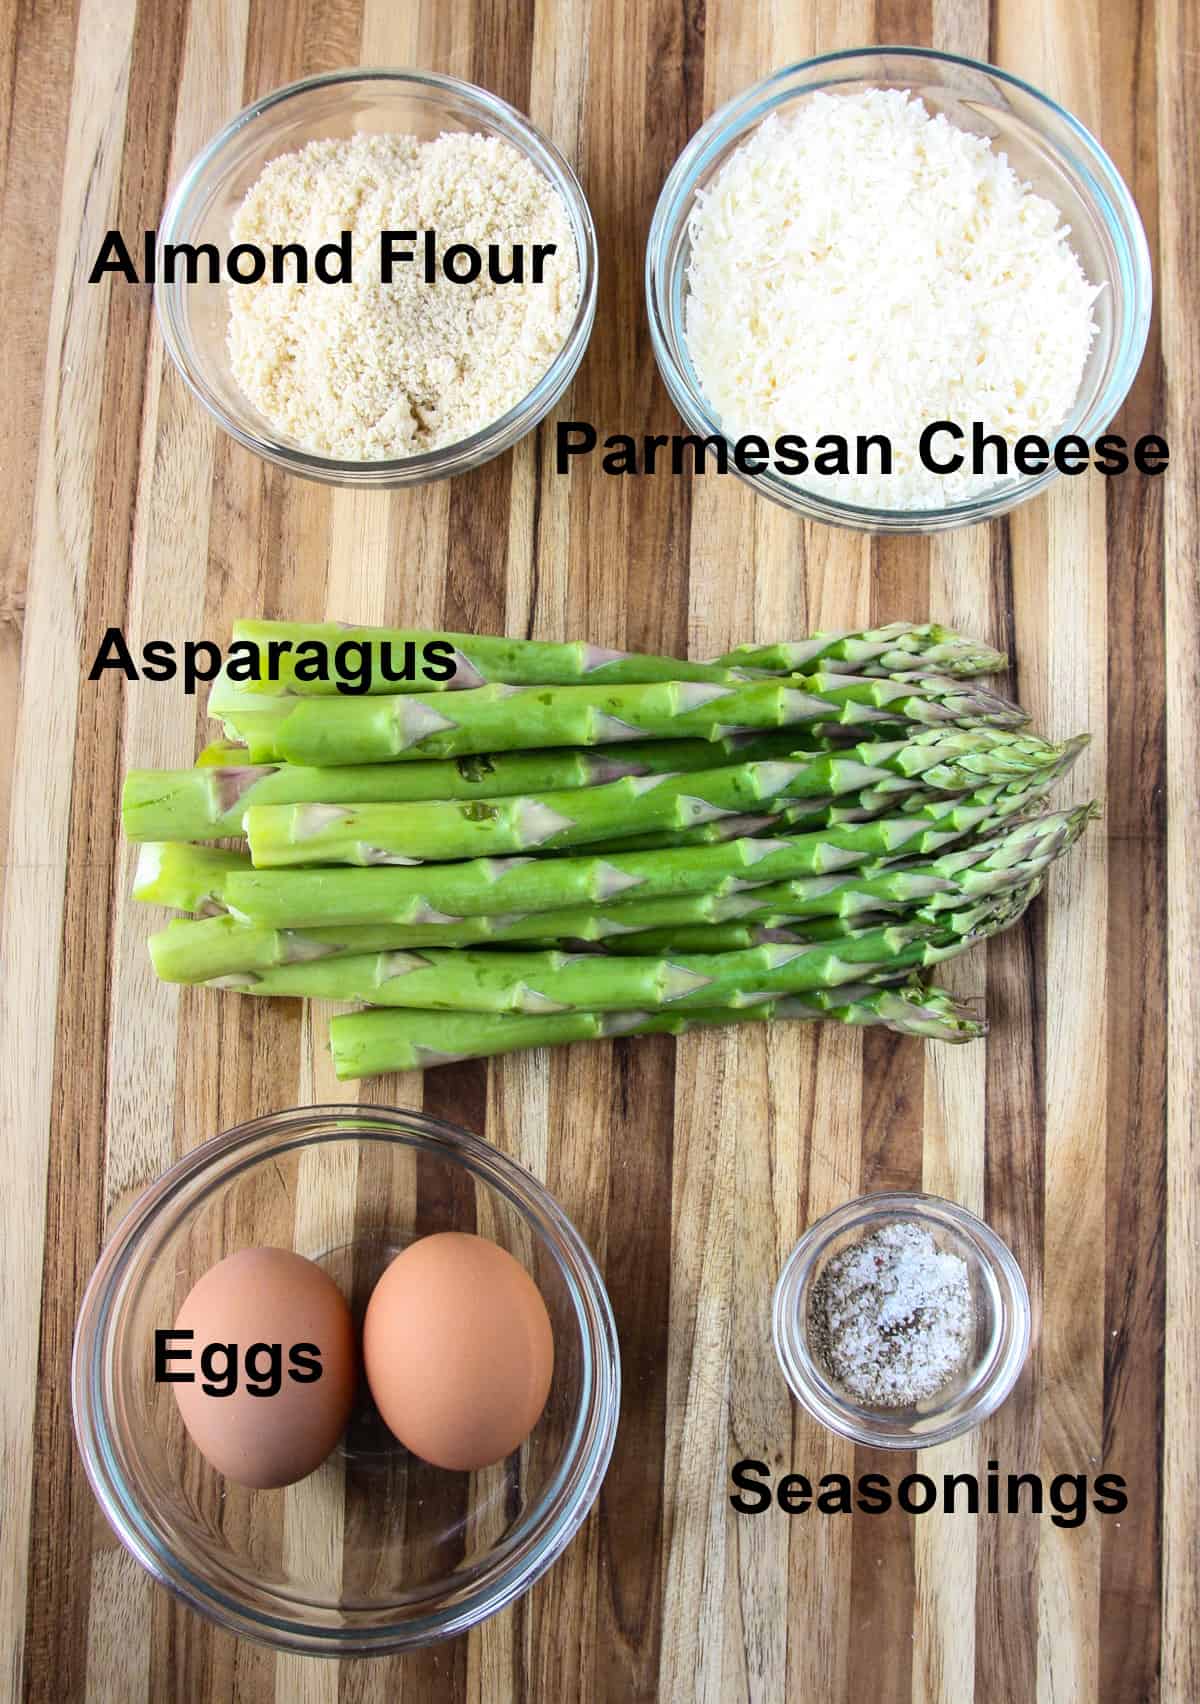 Ingredients to make the recipe on a wooden board.